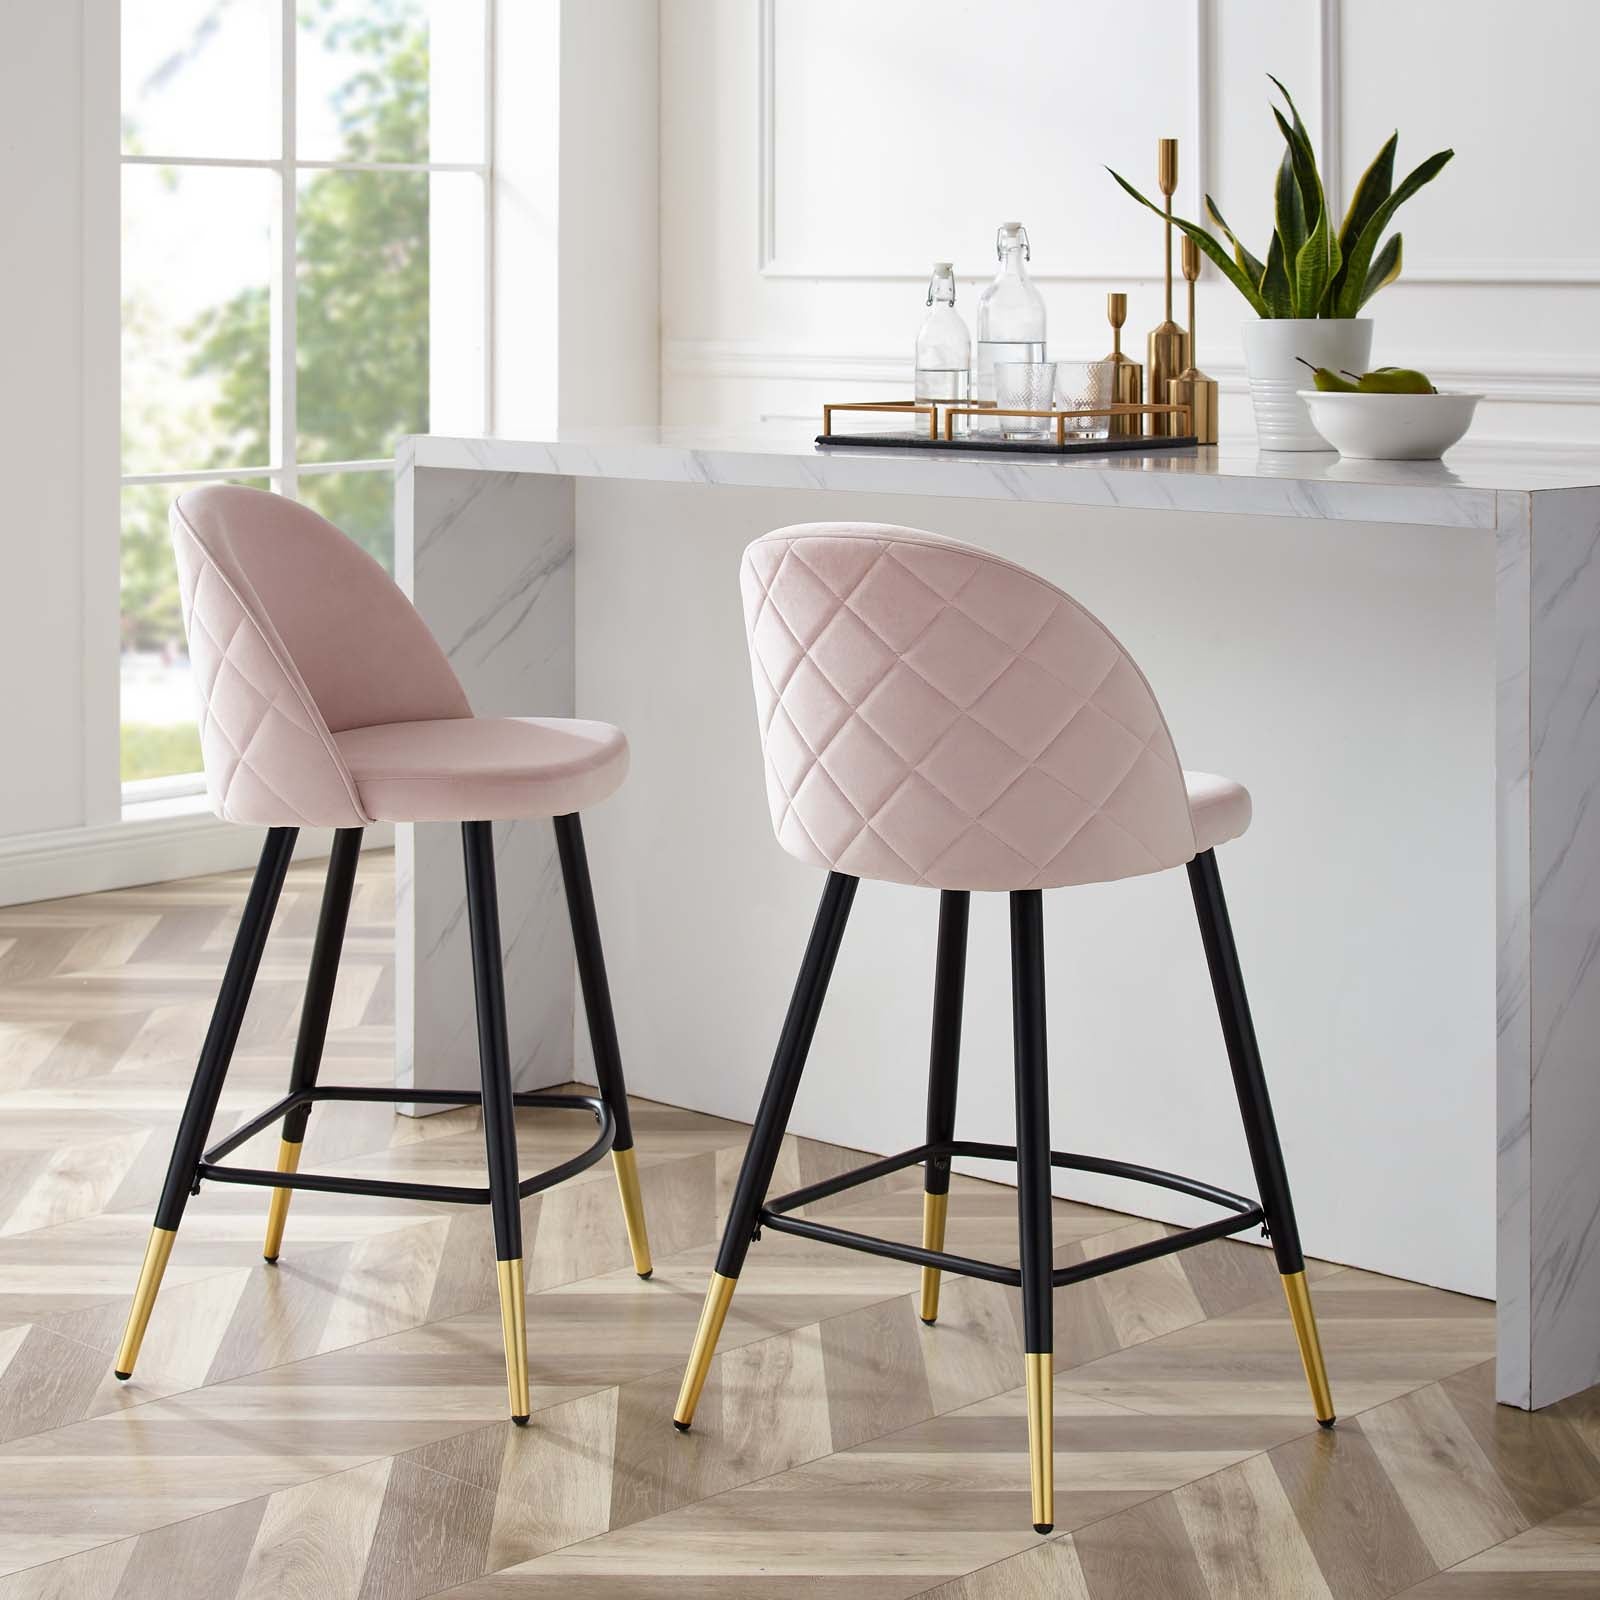 Modway Barstools - Cordial Performance Velvet Counter Stools - ( Set of 2 ) Pink